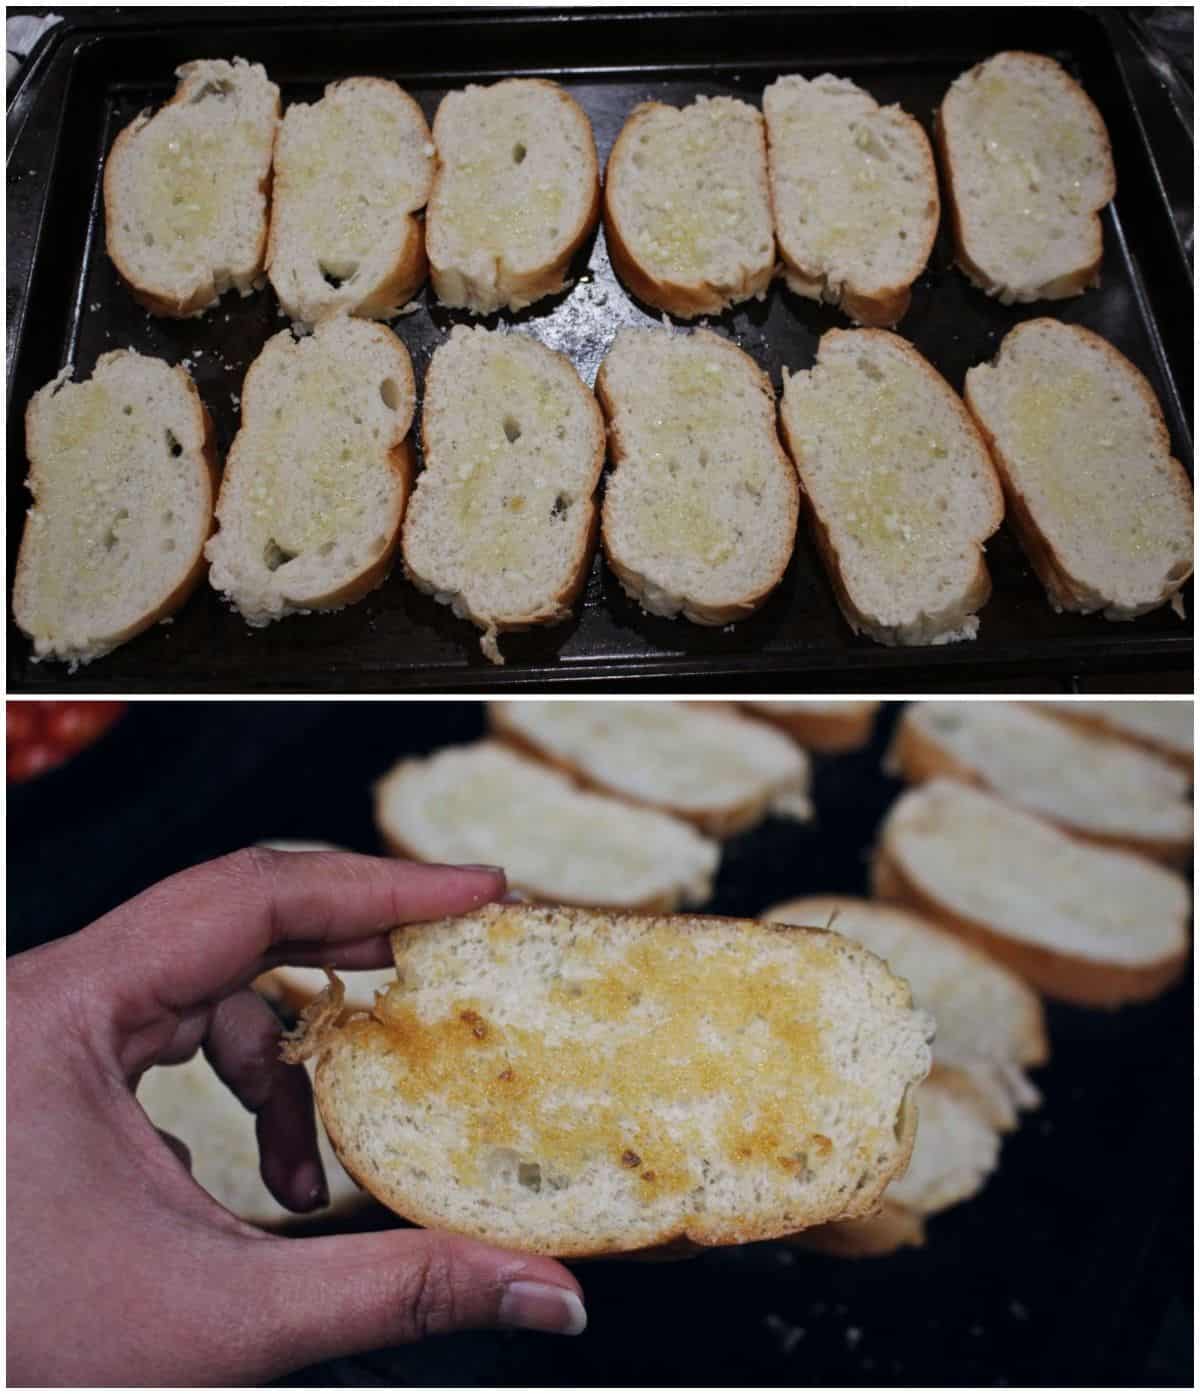 arranged bread slices in a tray and baked until golden brown